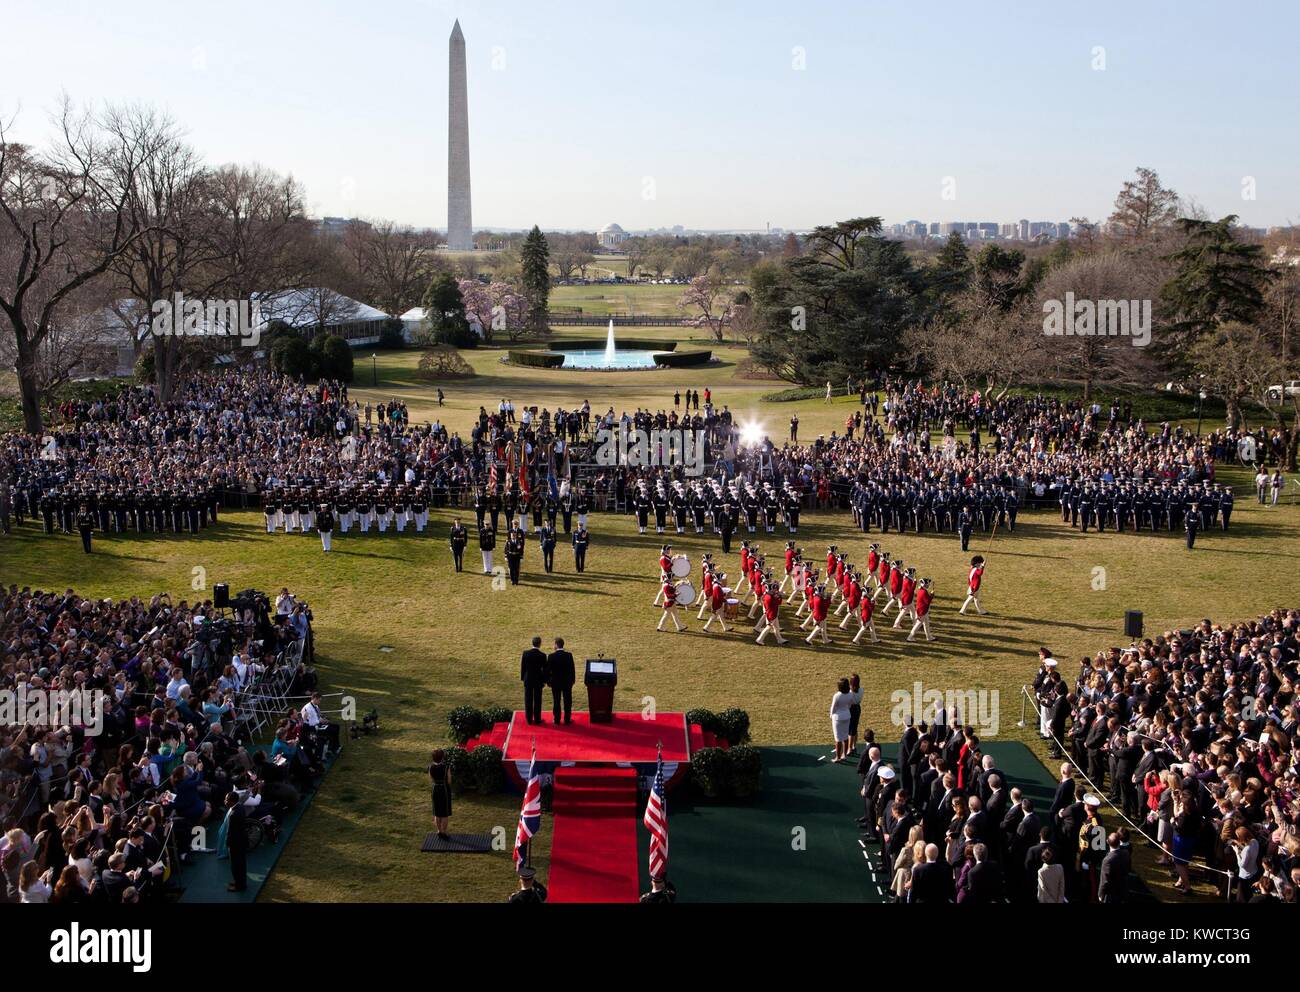 U.S. Army Fife and Drum Corps during an Arrival Ceremony on the South Lawn, White House. Ceremony was for Prime Minister David Cameron who stands with President Barack Obama on the red carpet. March 14, 2012 (BSLOC 2015 3 210) Stock Photo